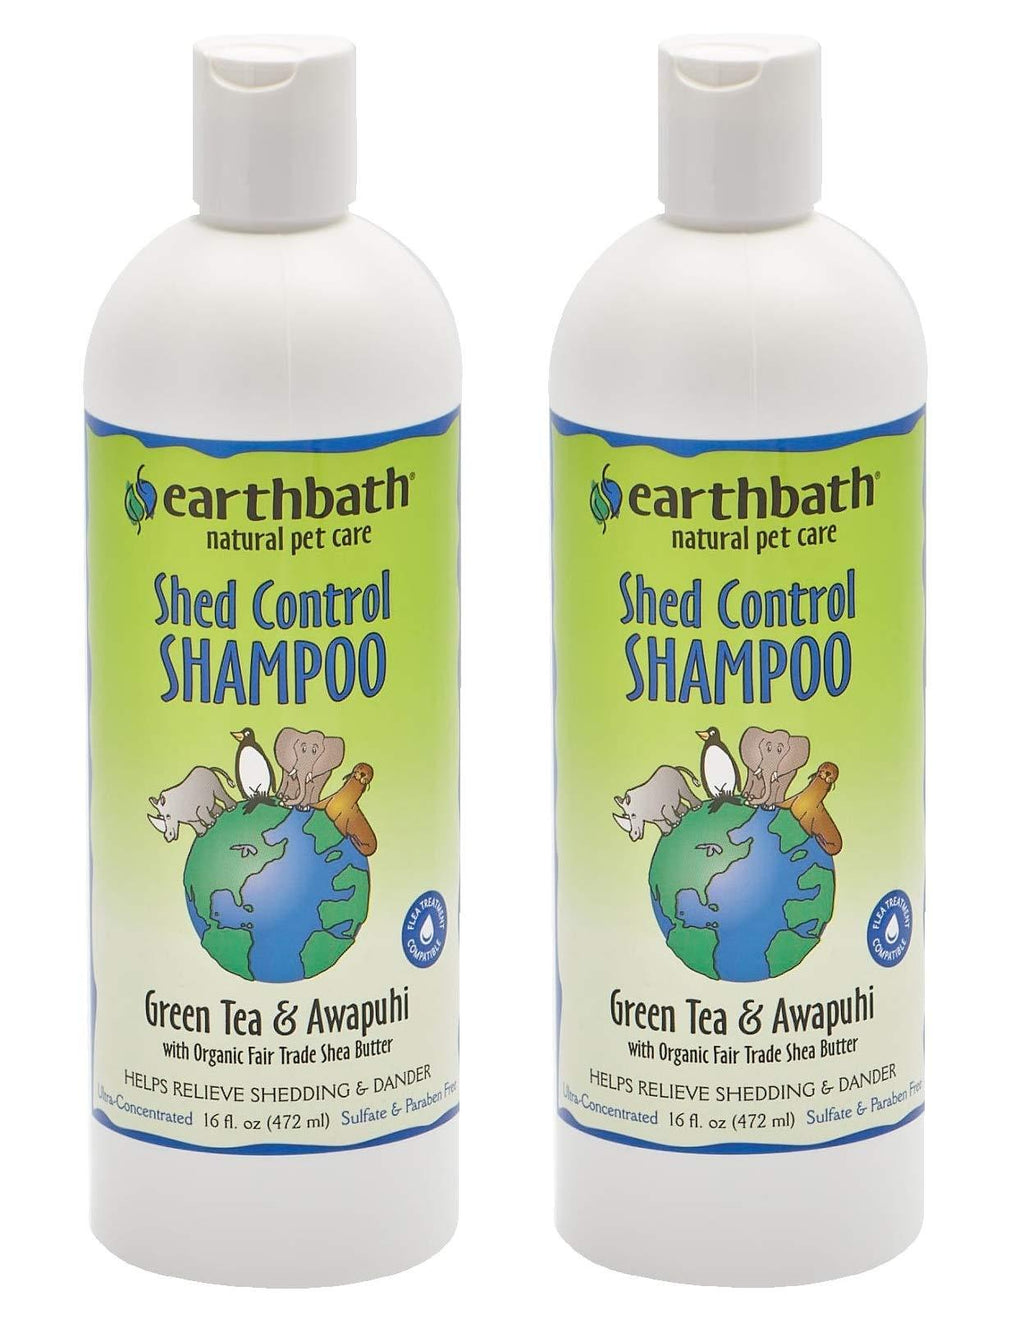 [Australia] - Earthbath All Natural Green Tea Shampoo Shed Control for Pets Dogs Cats (2 Pack), 16 oz 